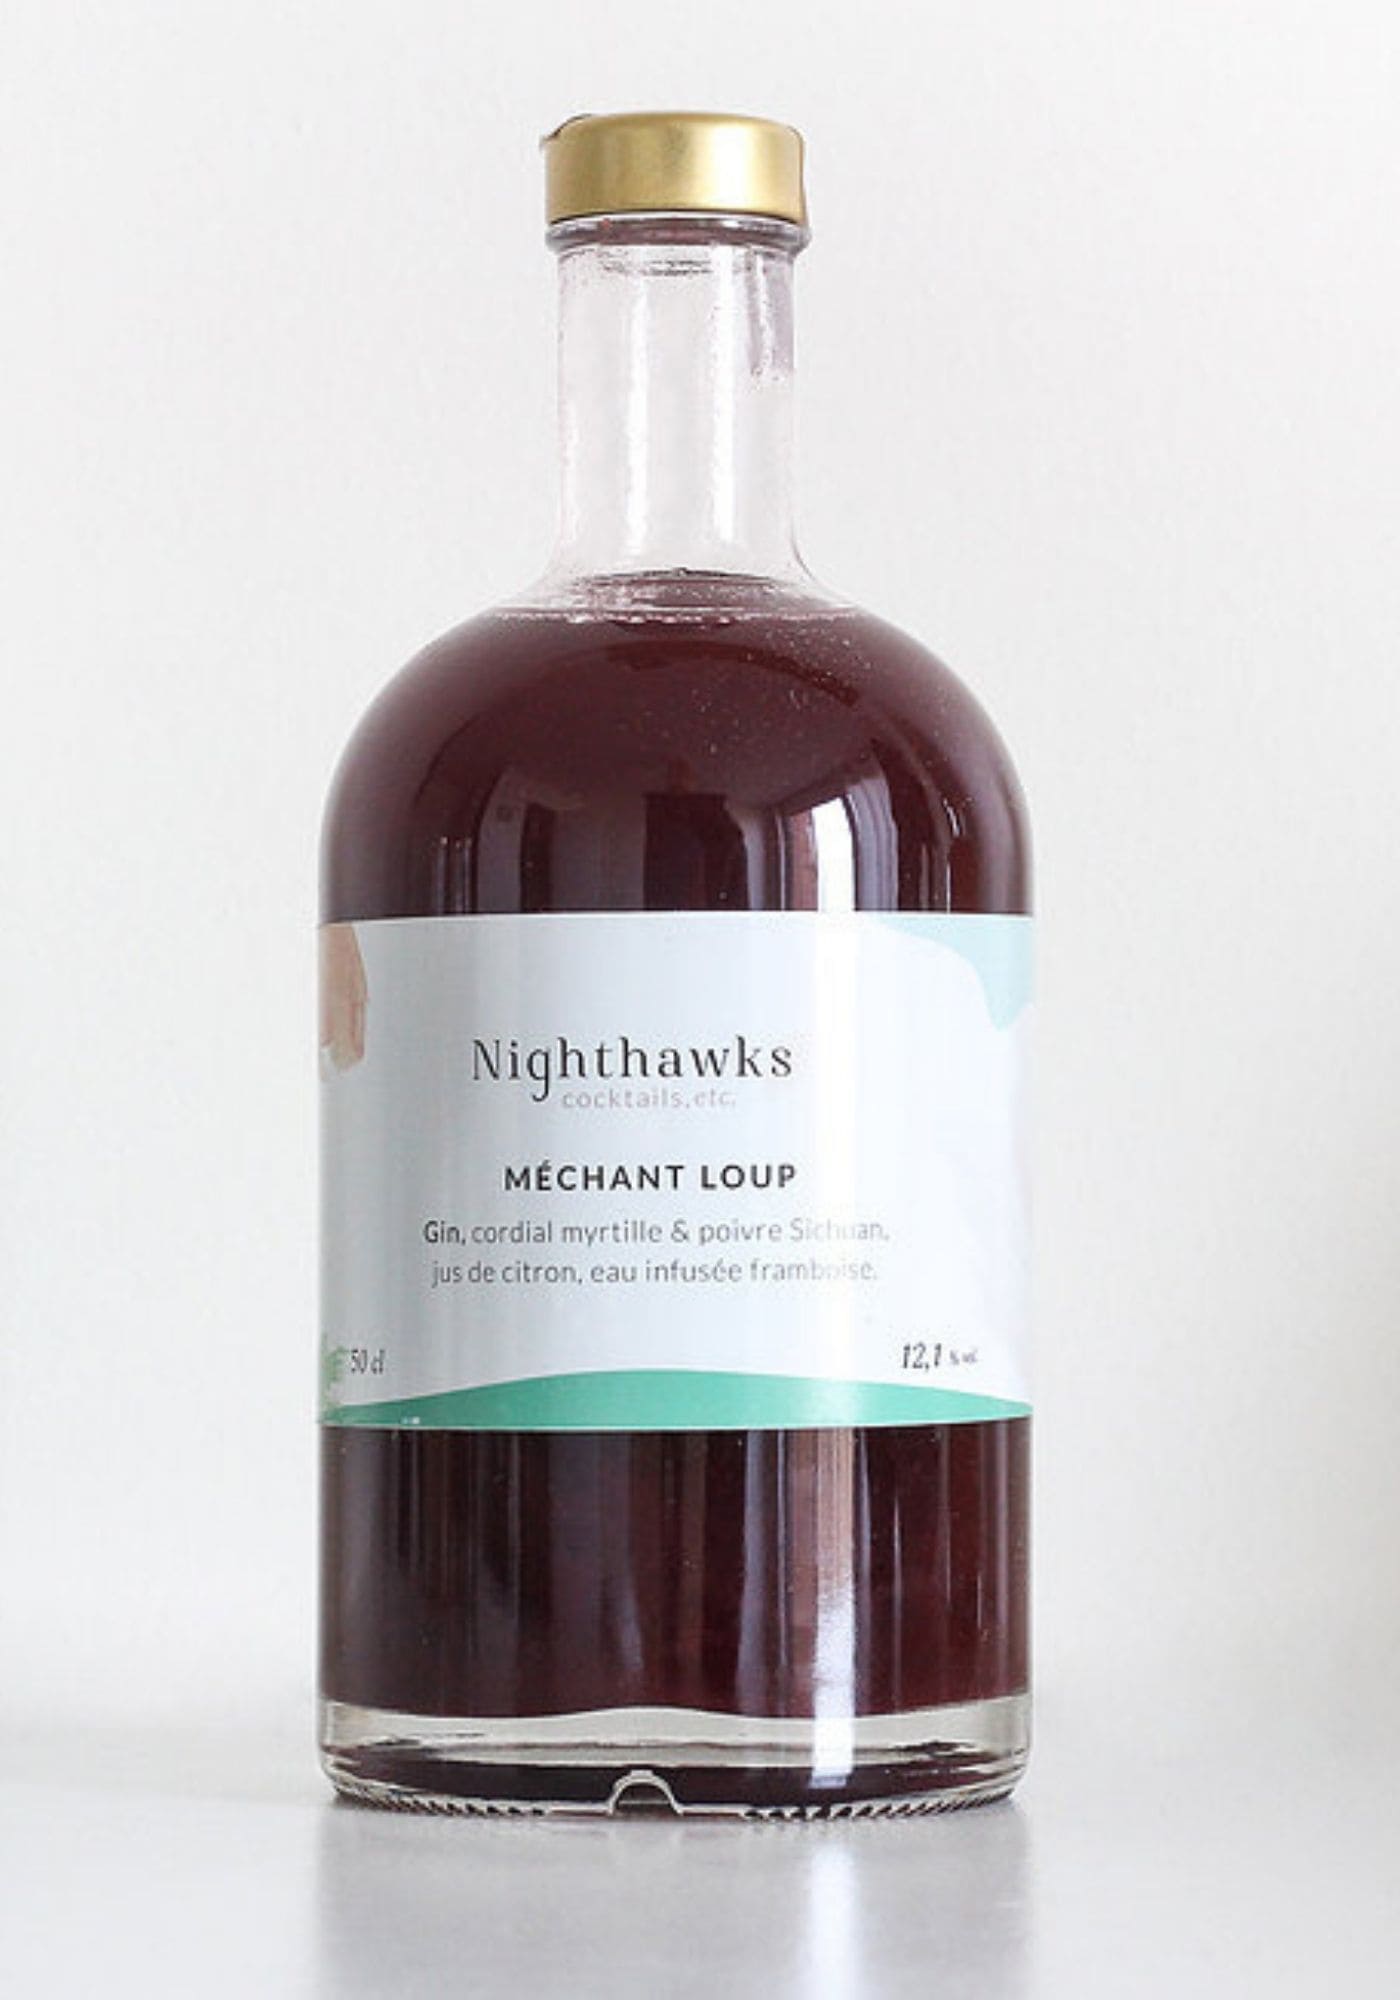 cocktail-mechant-loup-nighthawks-gin-alcool-made-in-france